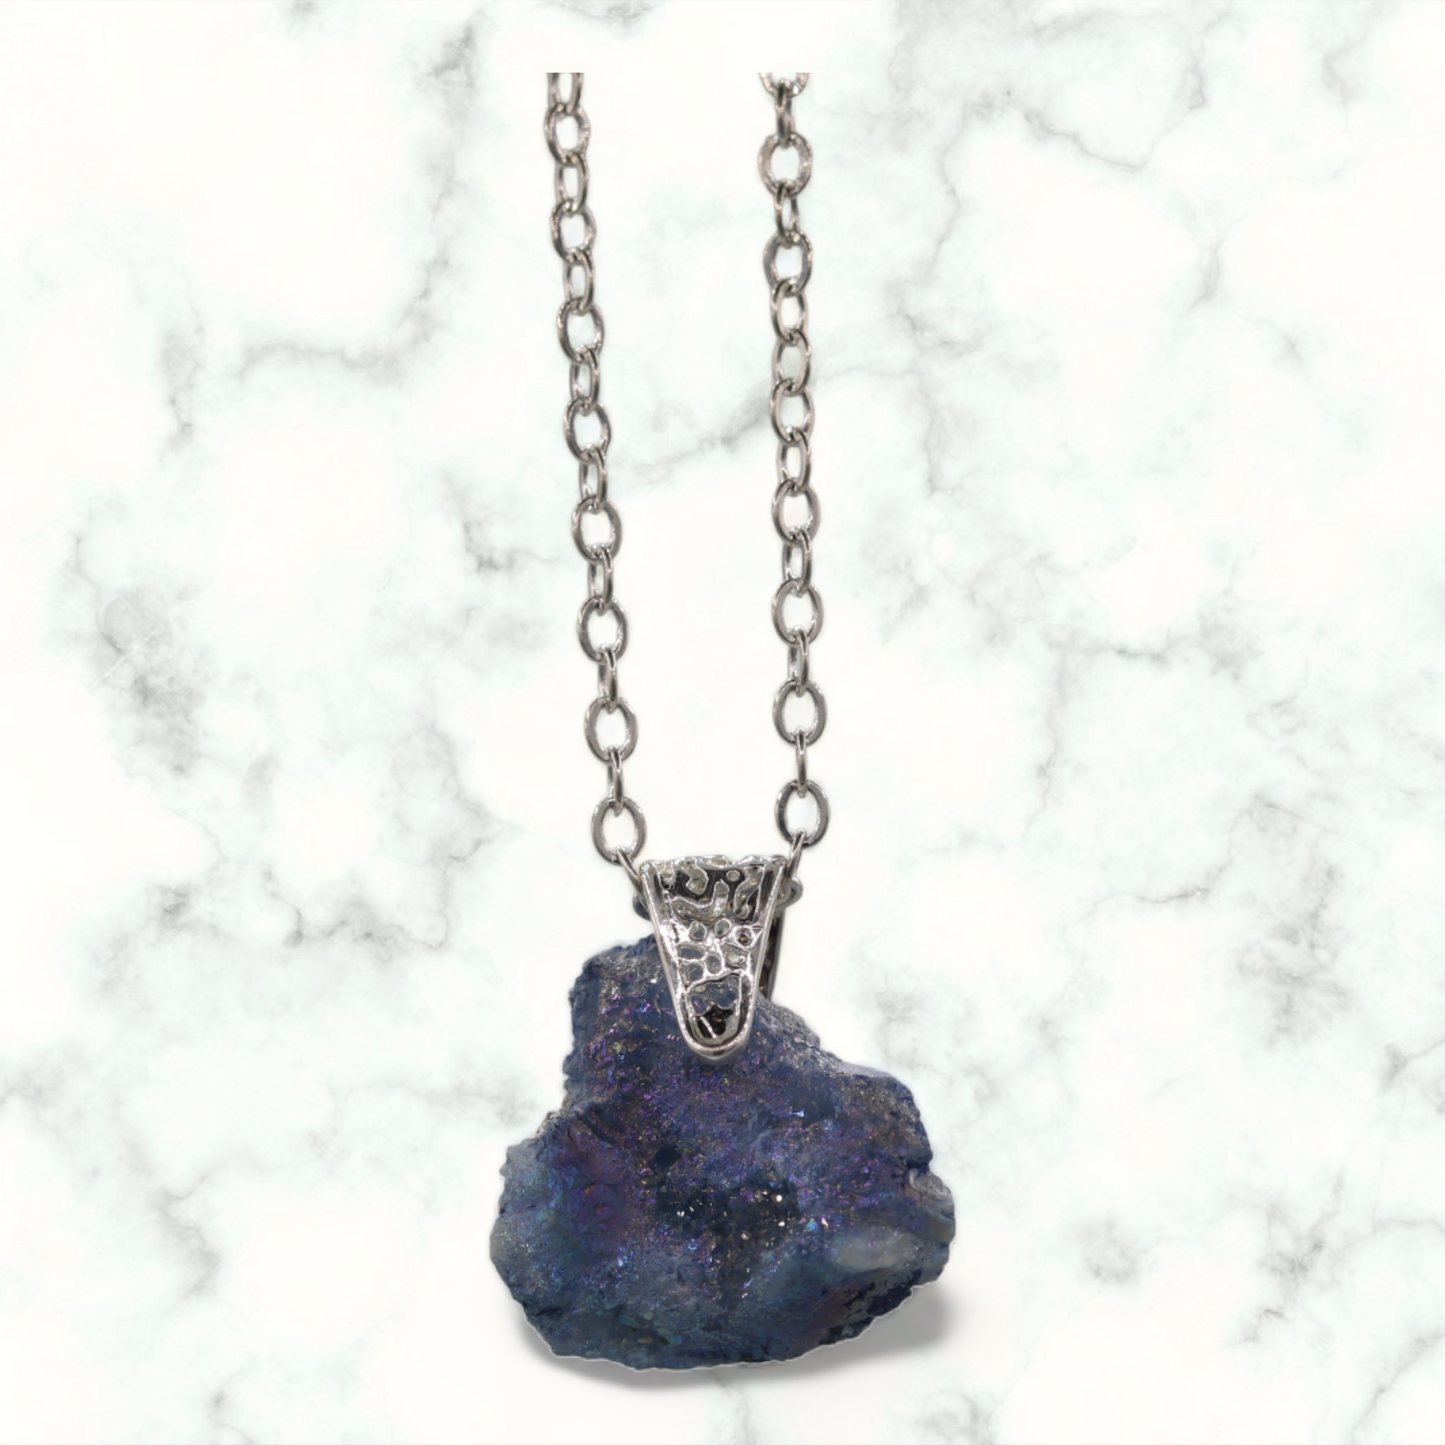 Purple Geode Nugget Necklace with Silver Filigree Bale on a Silver Chain 21.5"